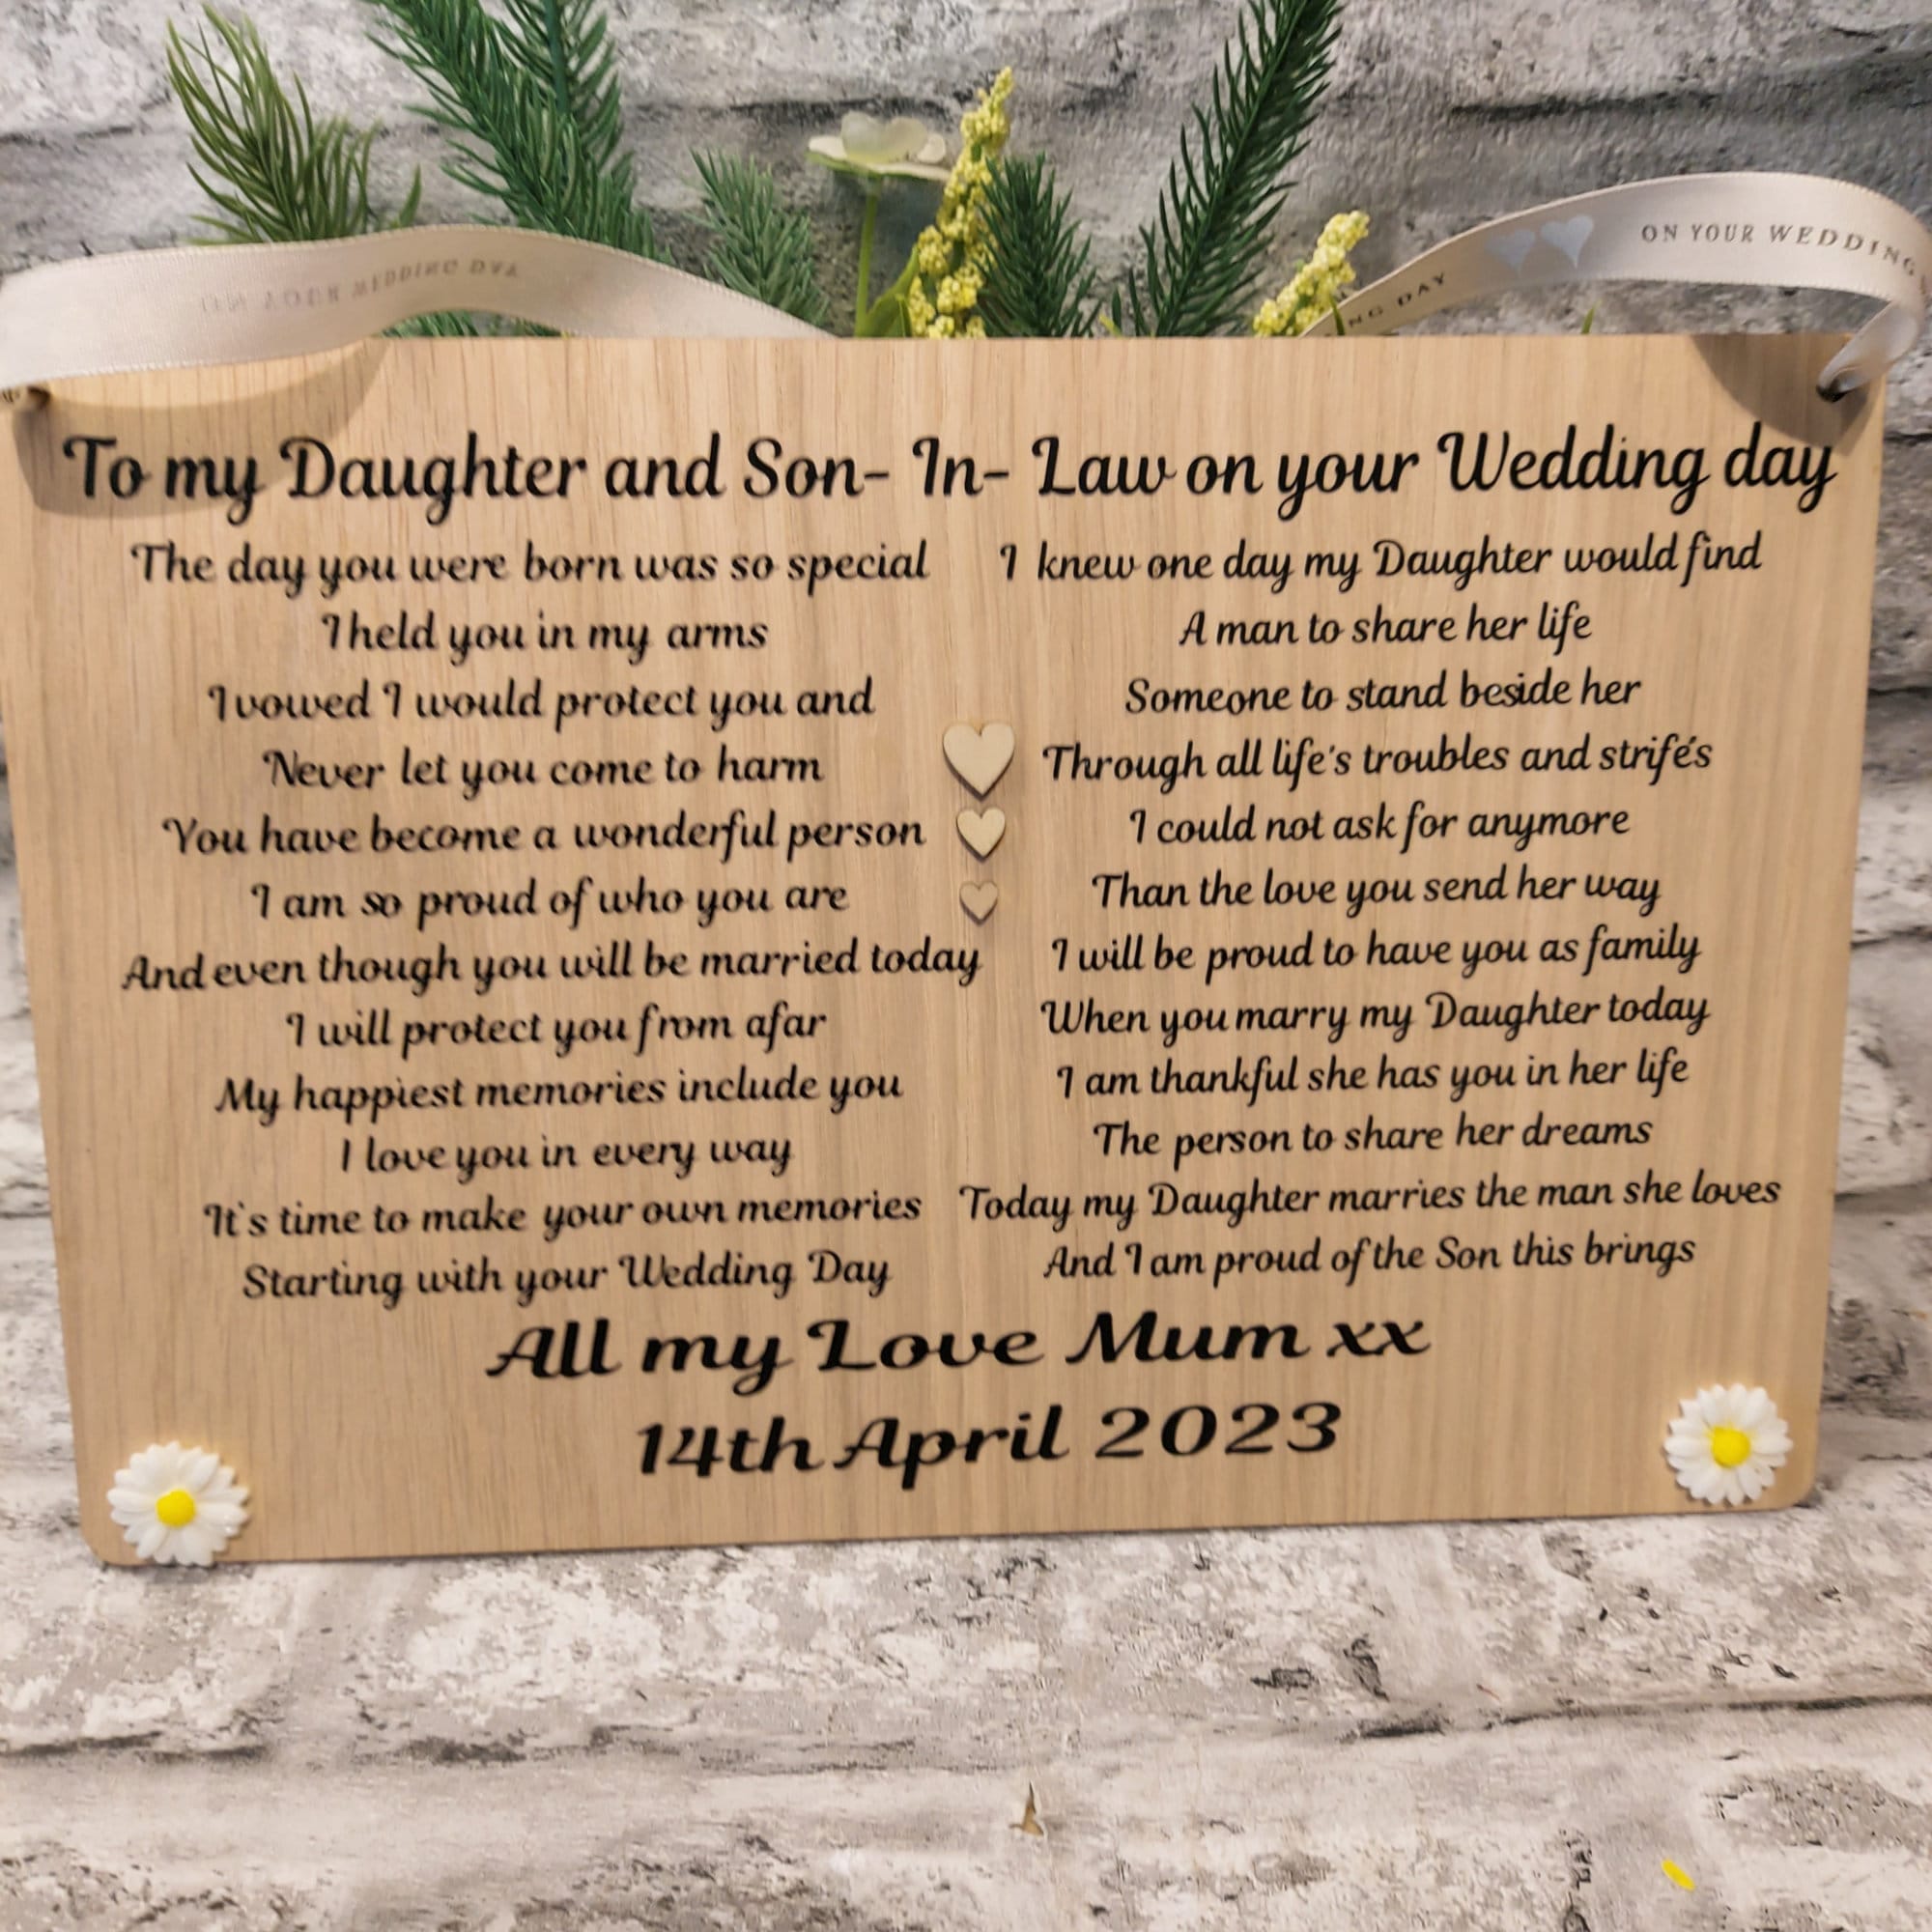 To My Daughter and Son in Law on Your Wedding photo